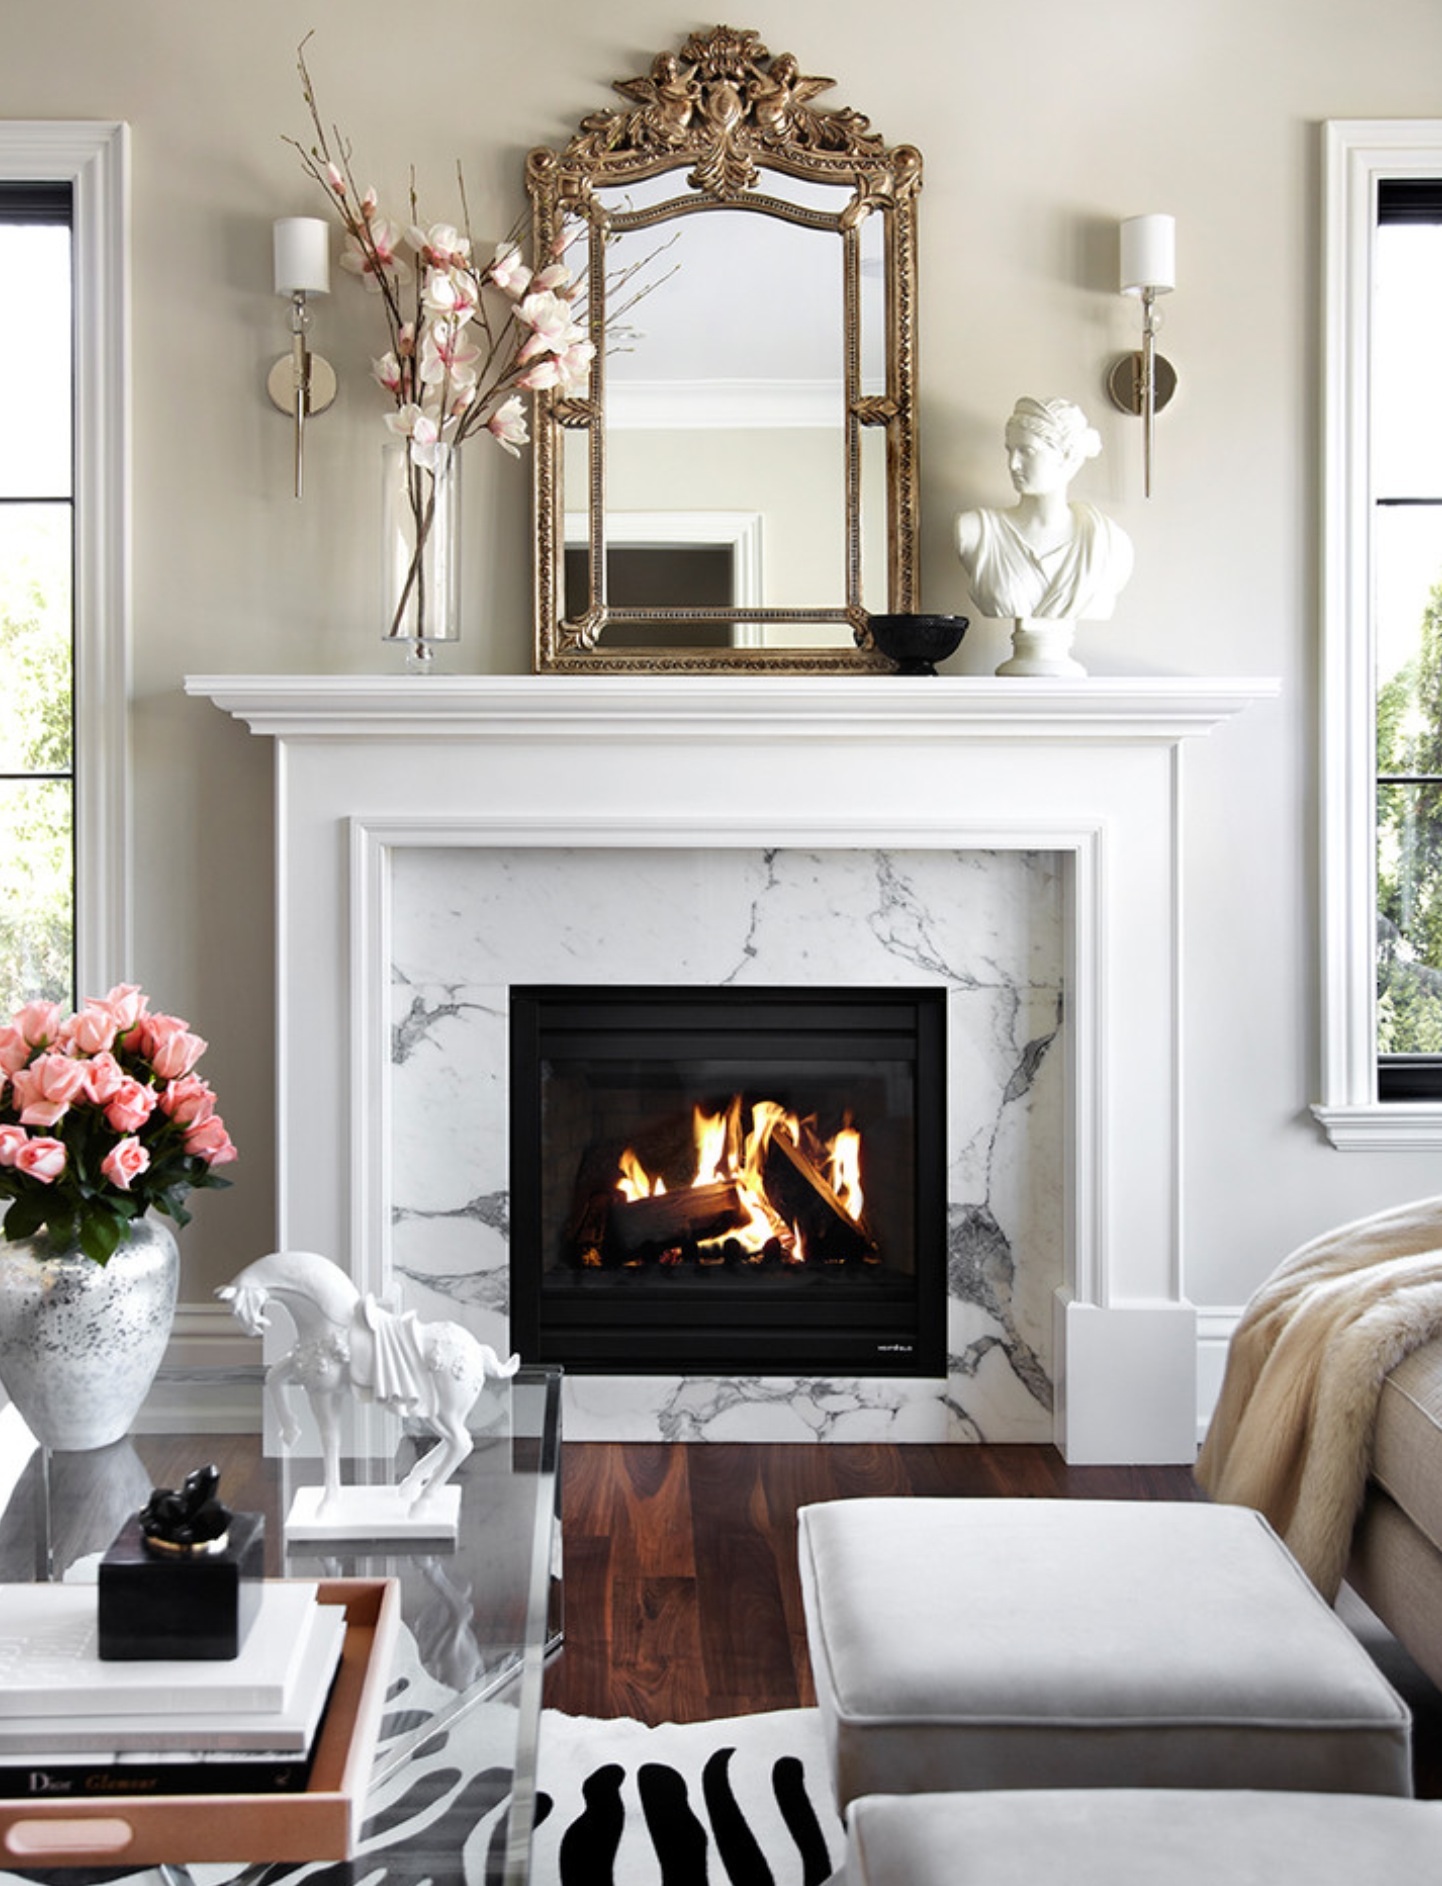 40 Awesome Living Room Designs With Fireplace Decoration Love